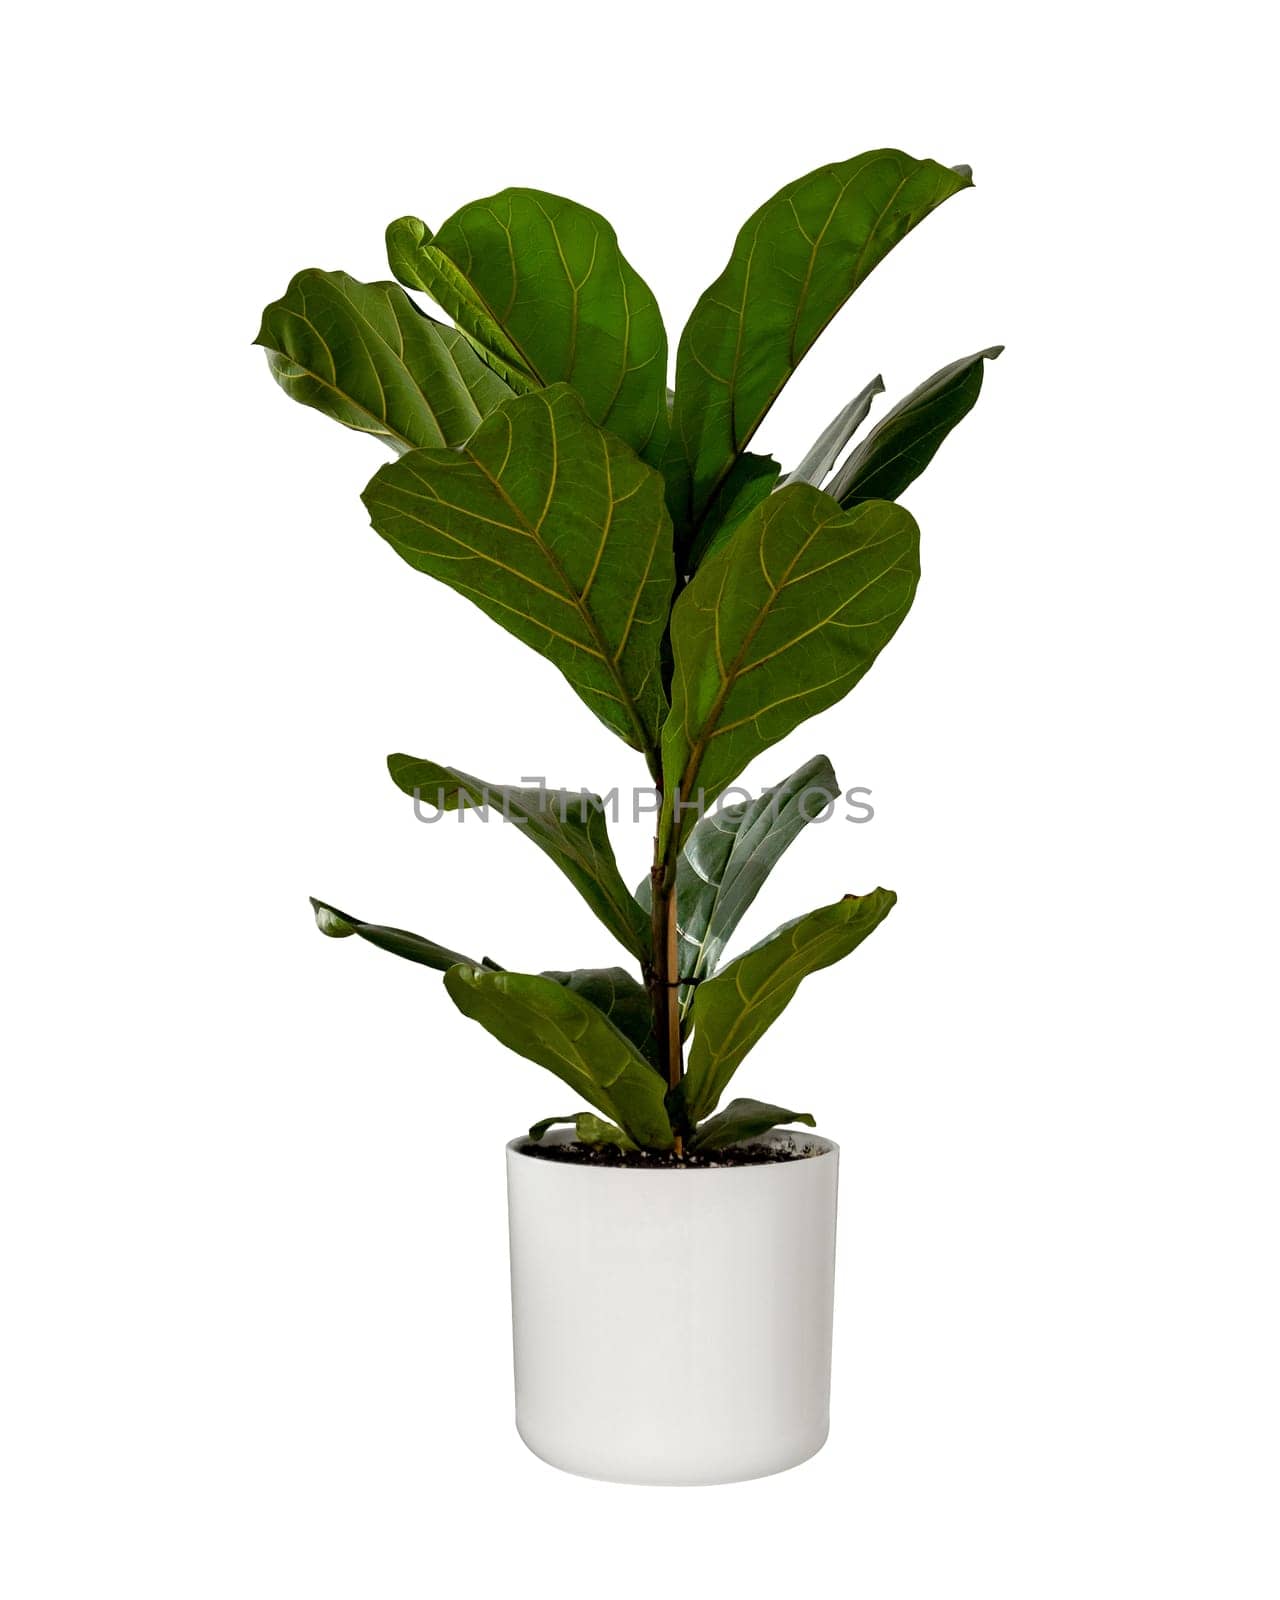 Ficus lyrata or fiddle leaf fig in white ceramic pot isolated on white background. Potted ficus Lyrata or fiddle leaf fig tree isolated with clipping path